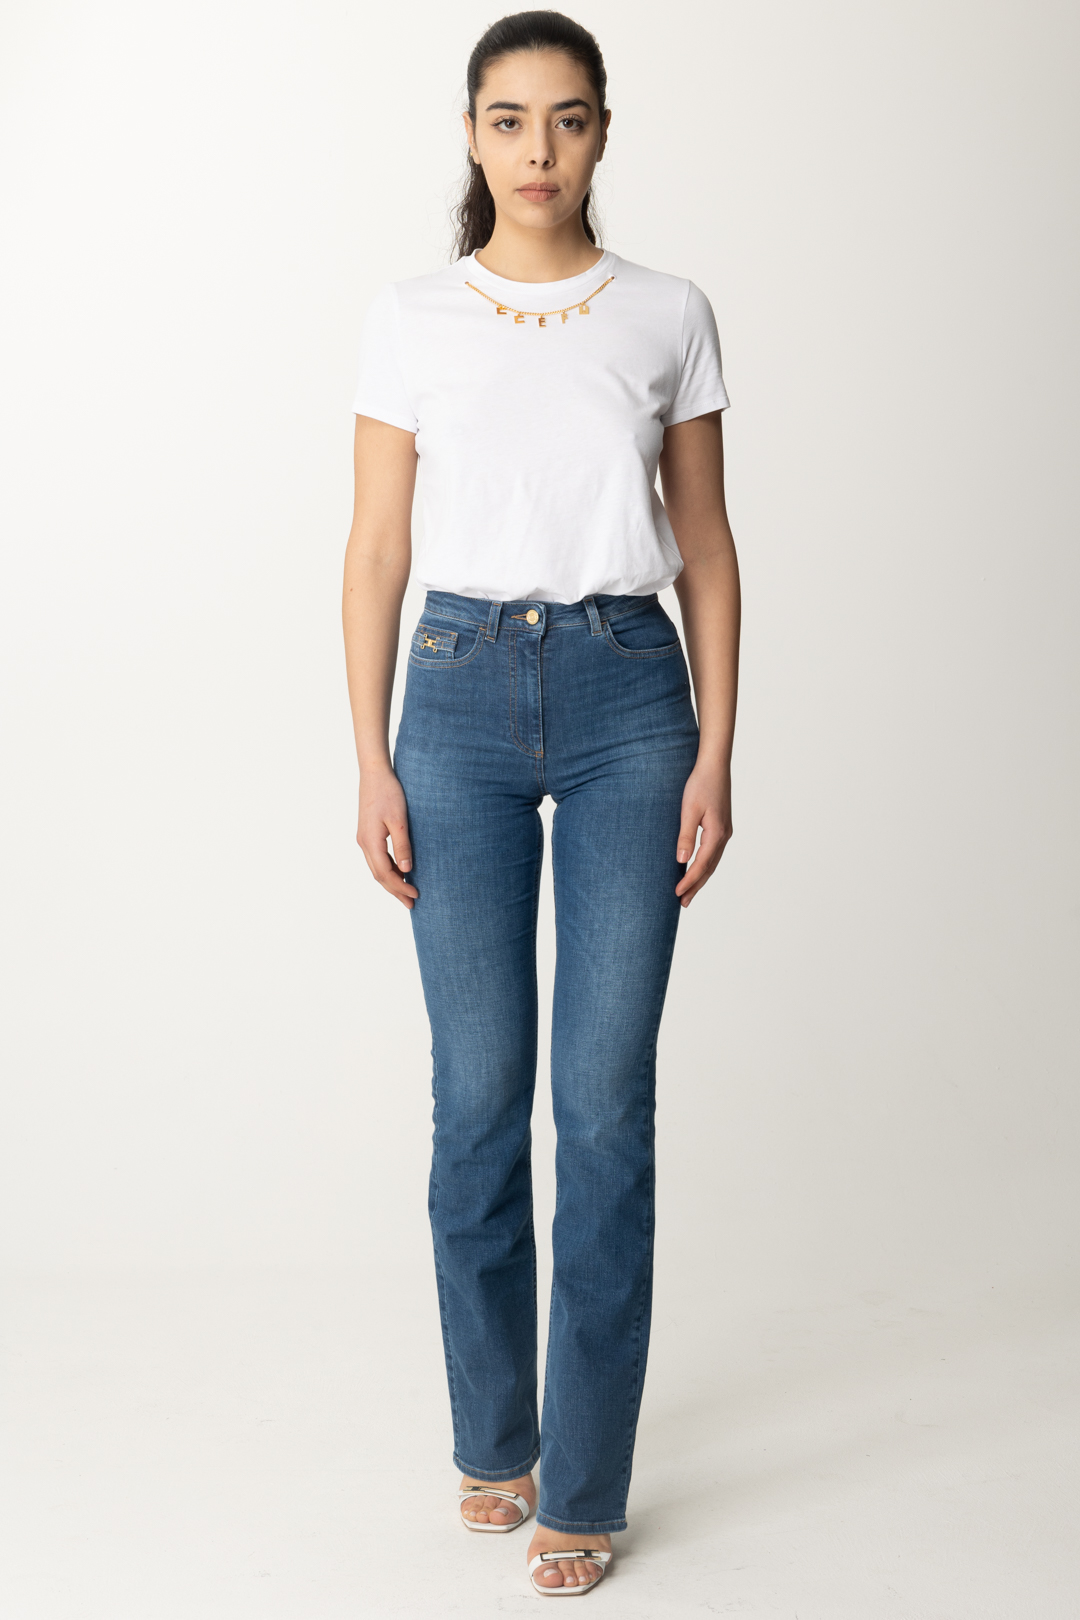 Preview: Elisabetta Franchi T-shirt with Charm Necklace Gesso